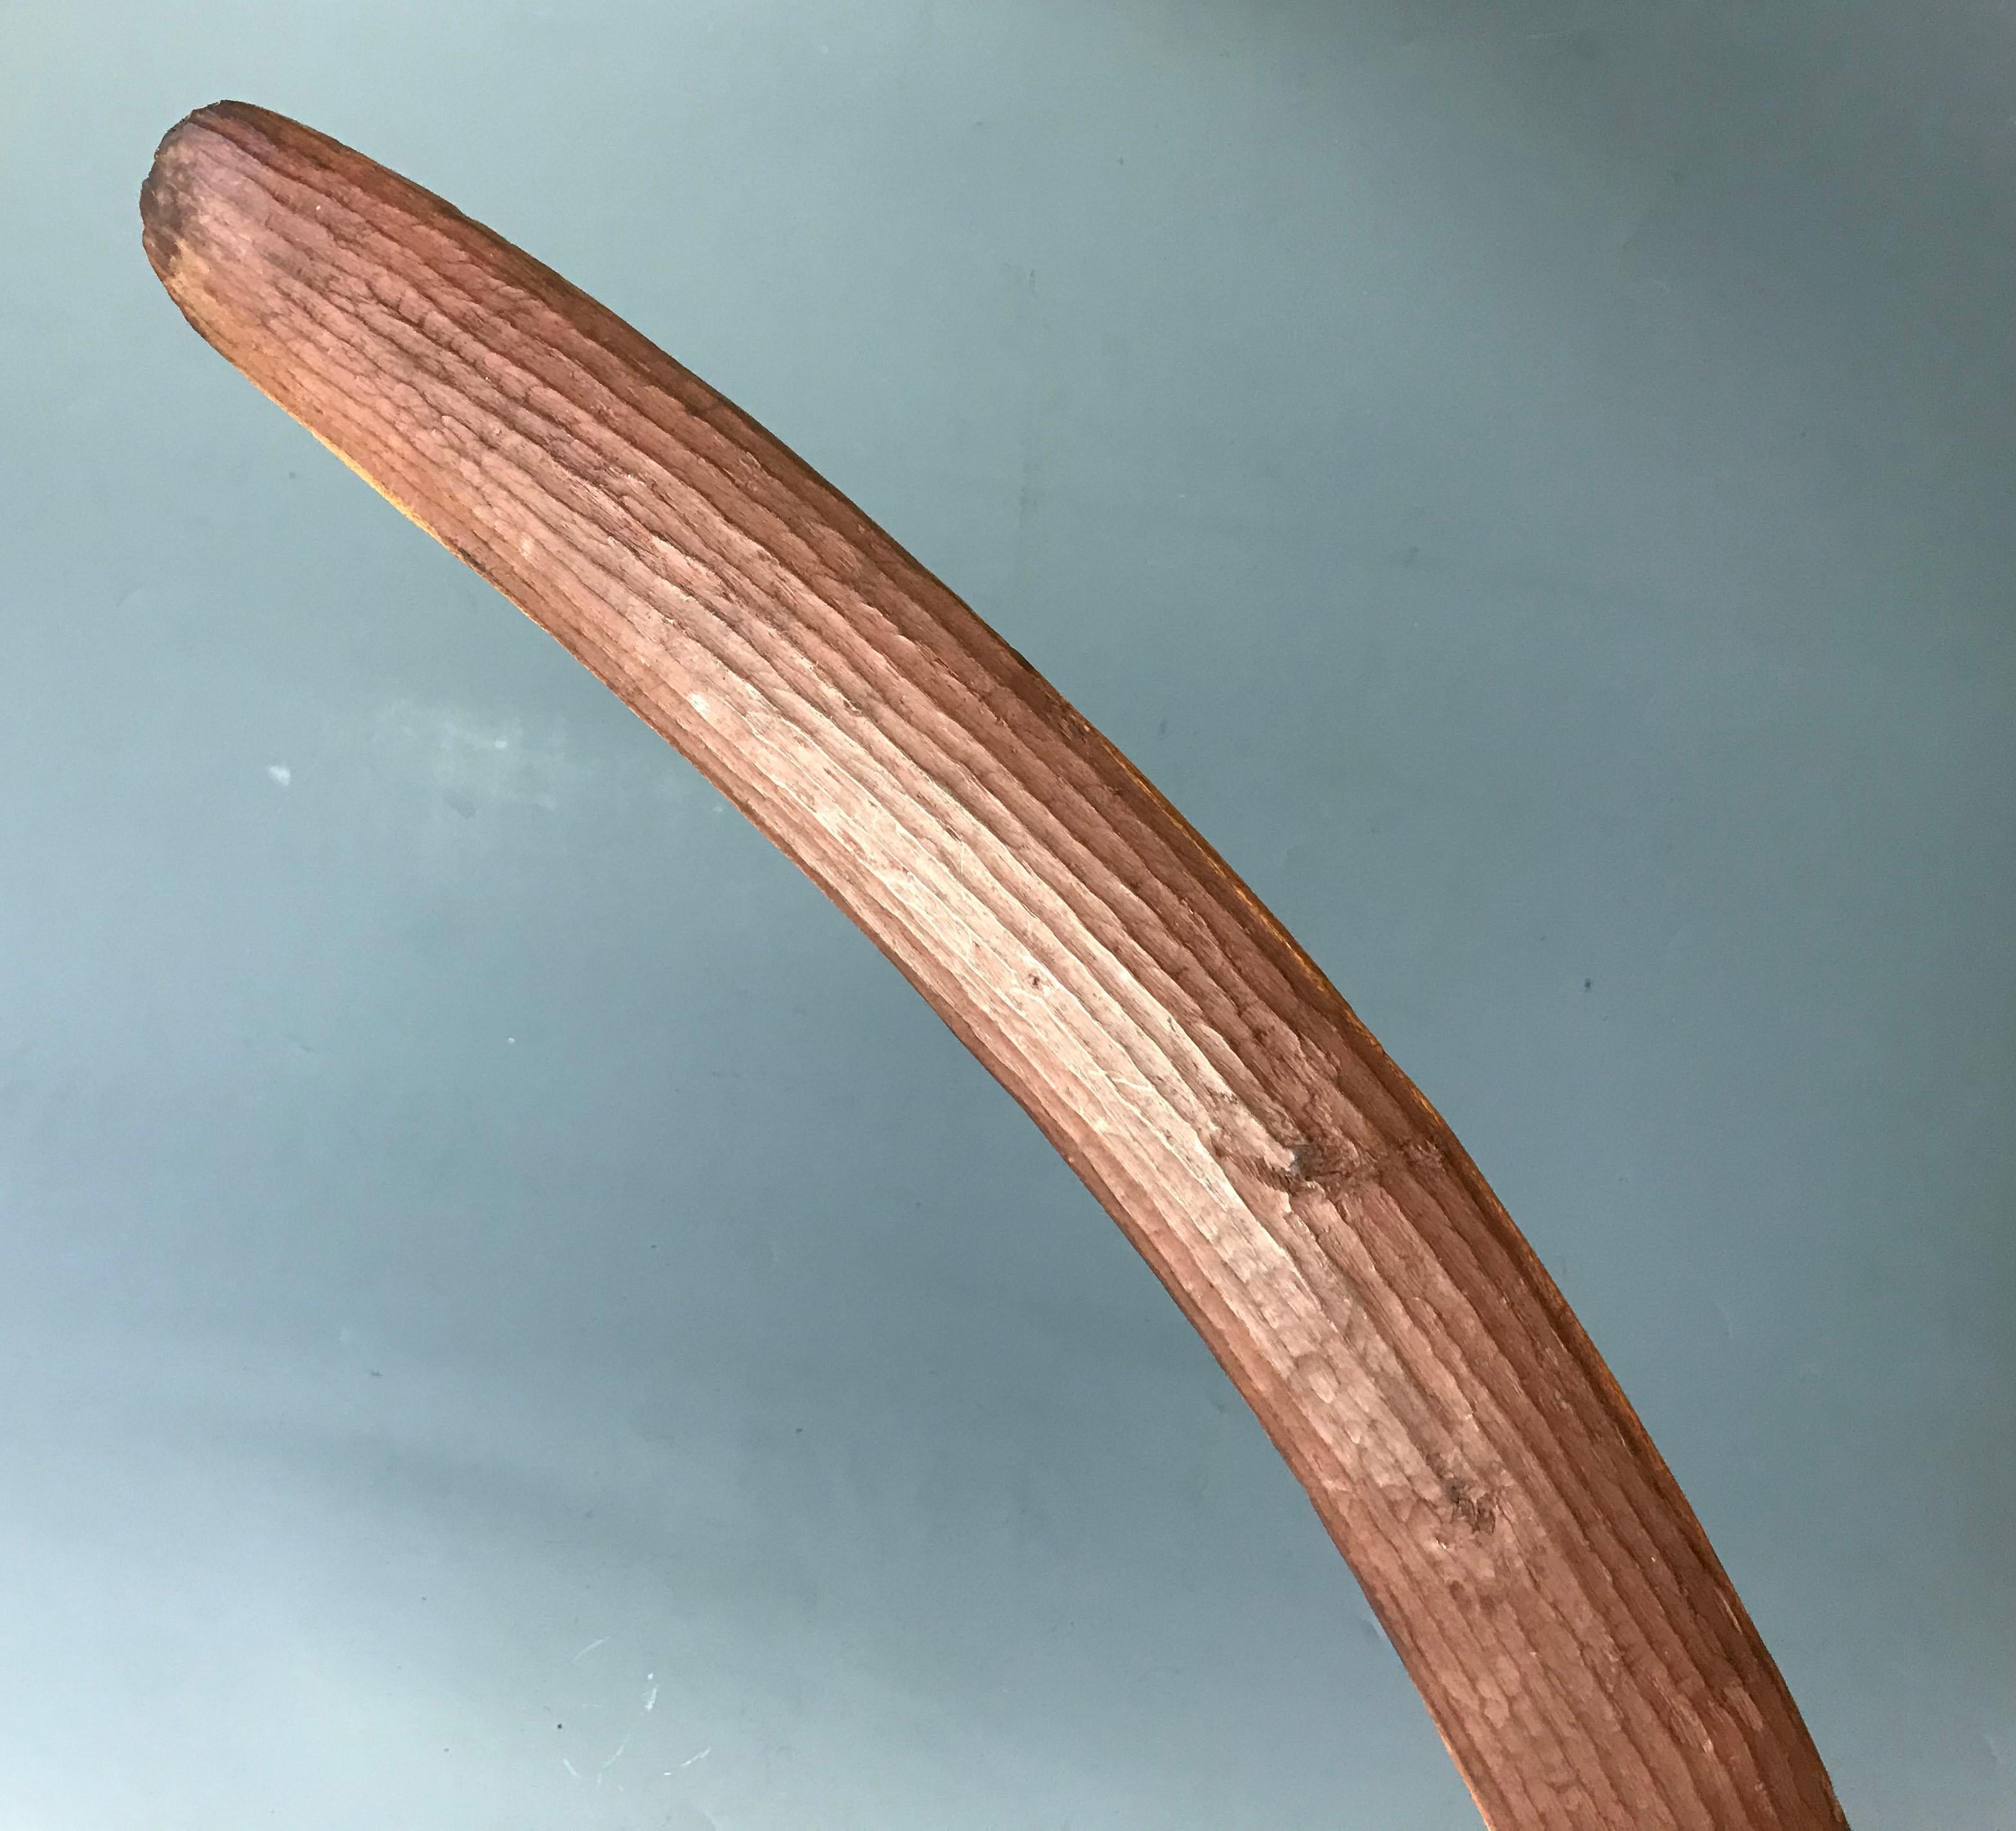 Very Good Antique Aboriginal carved wood Boomerang Australia 
Carved with fluted design on one face chip design on back, red pigment
Central desert region Australia
Original Tribal piece
Period early late 19th early 20th century
Measure: Length 85